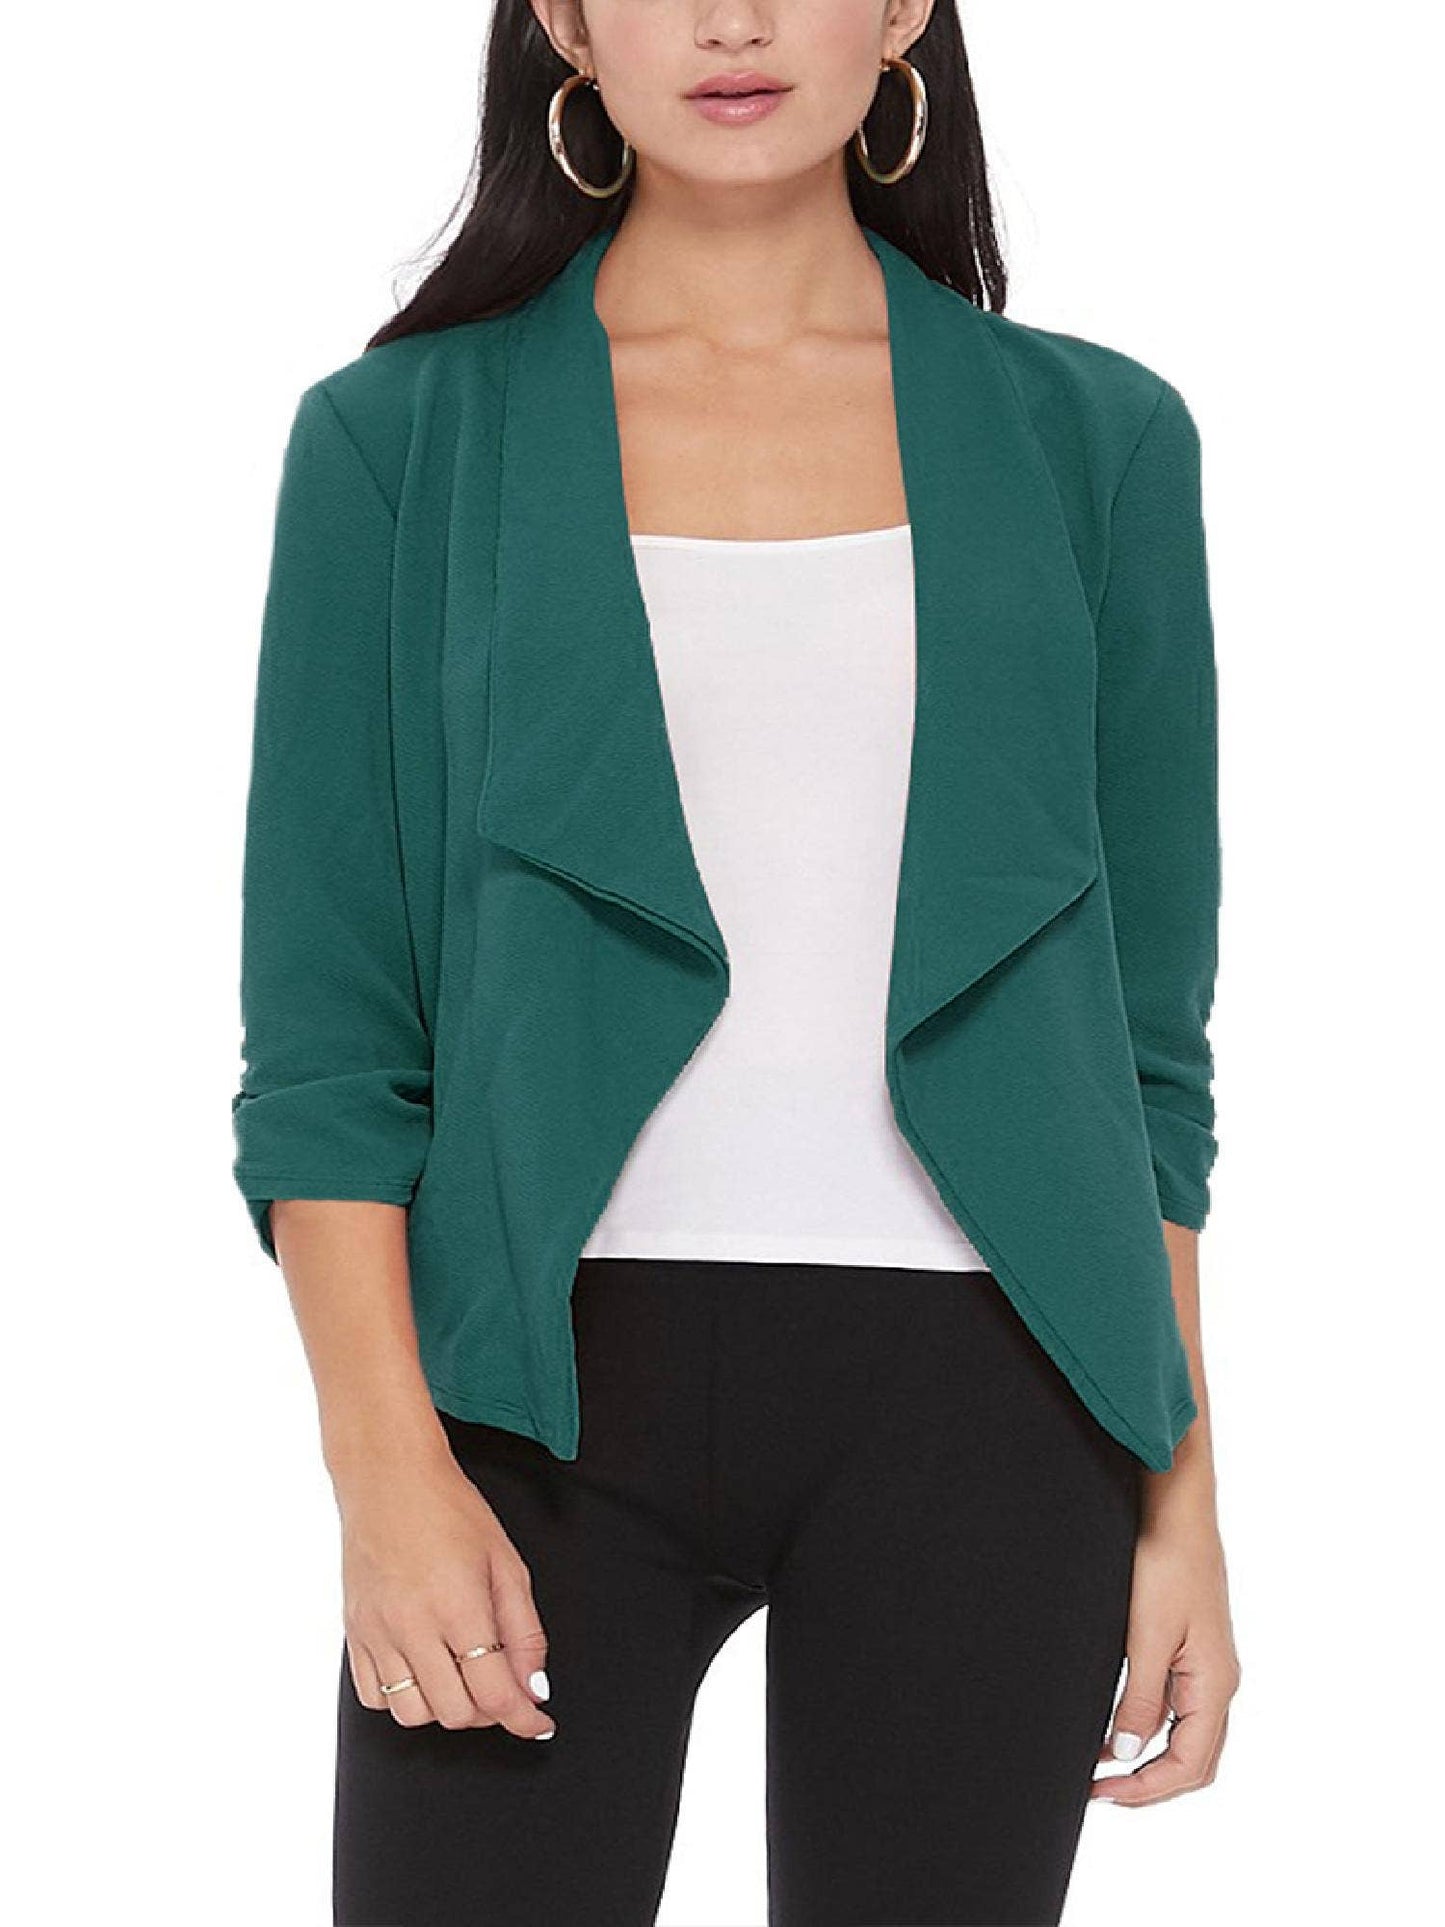 Emerald Casual Open Front Slim Fit Draped Solid Blazer Jacket